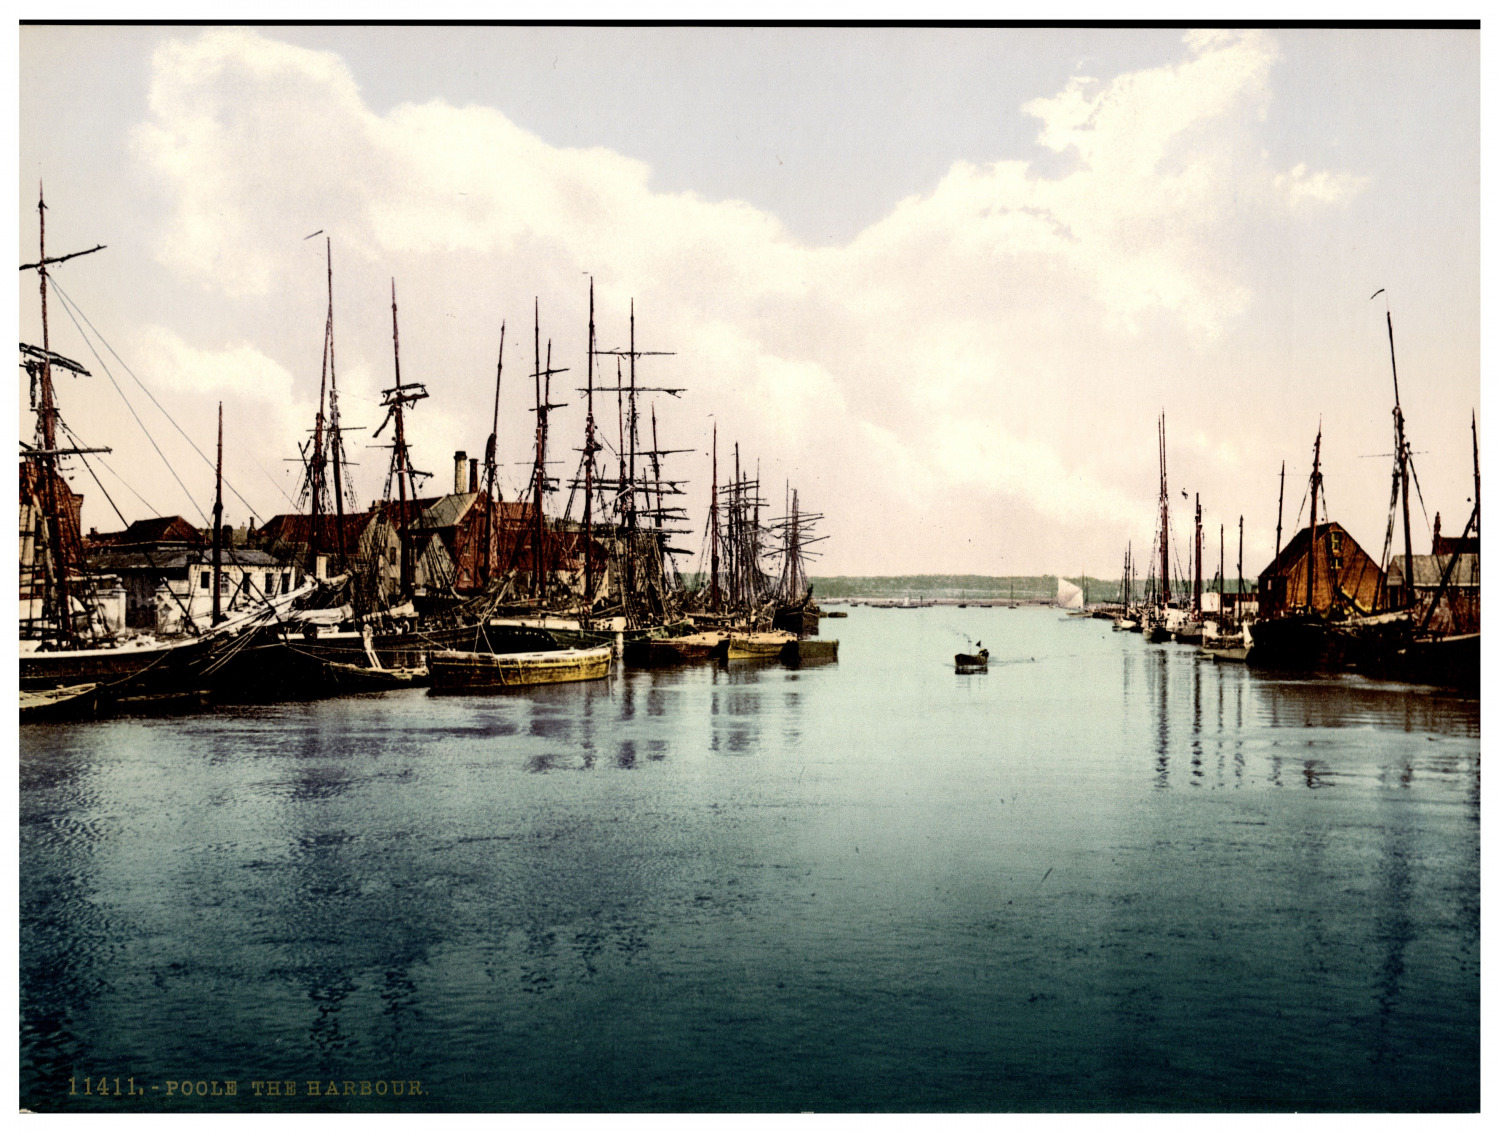 England. Poole. The Harbour. Vintage photochrome by P.Z, photochrome Zurich p